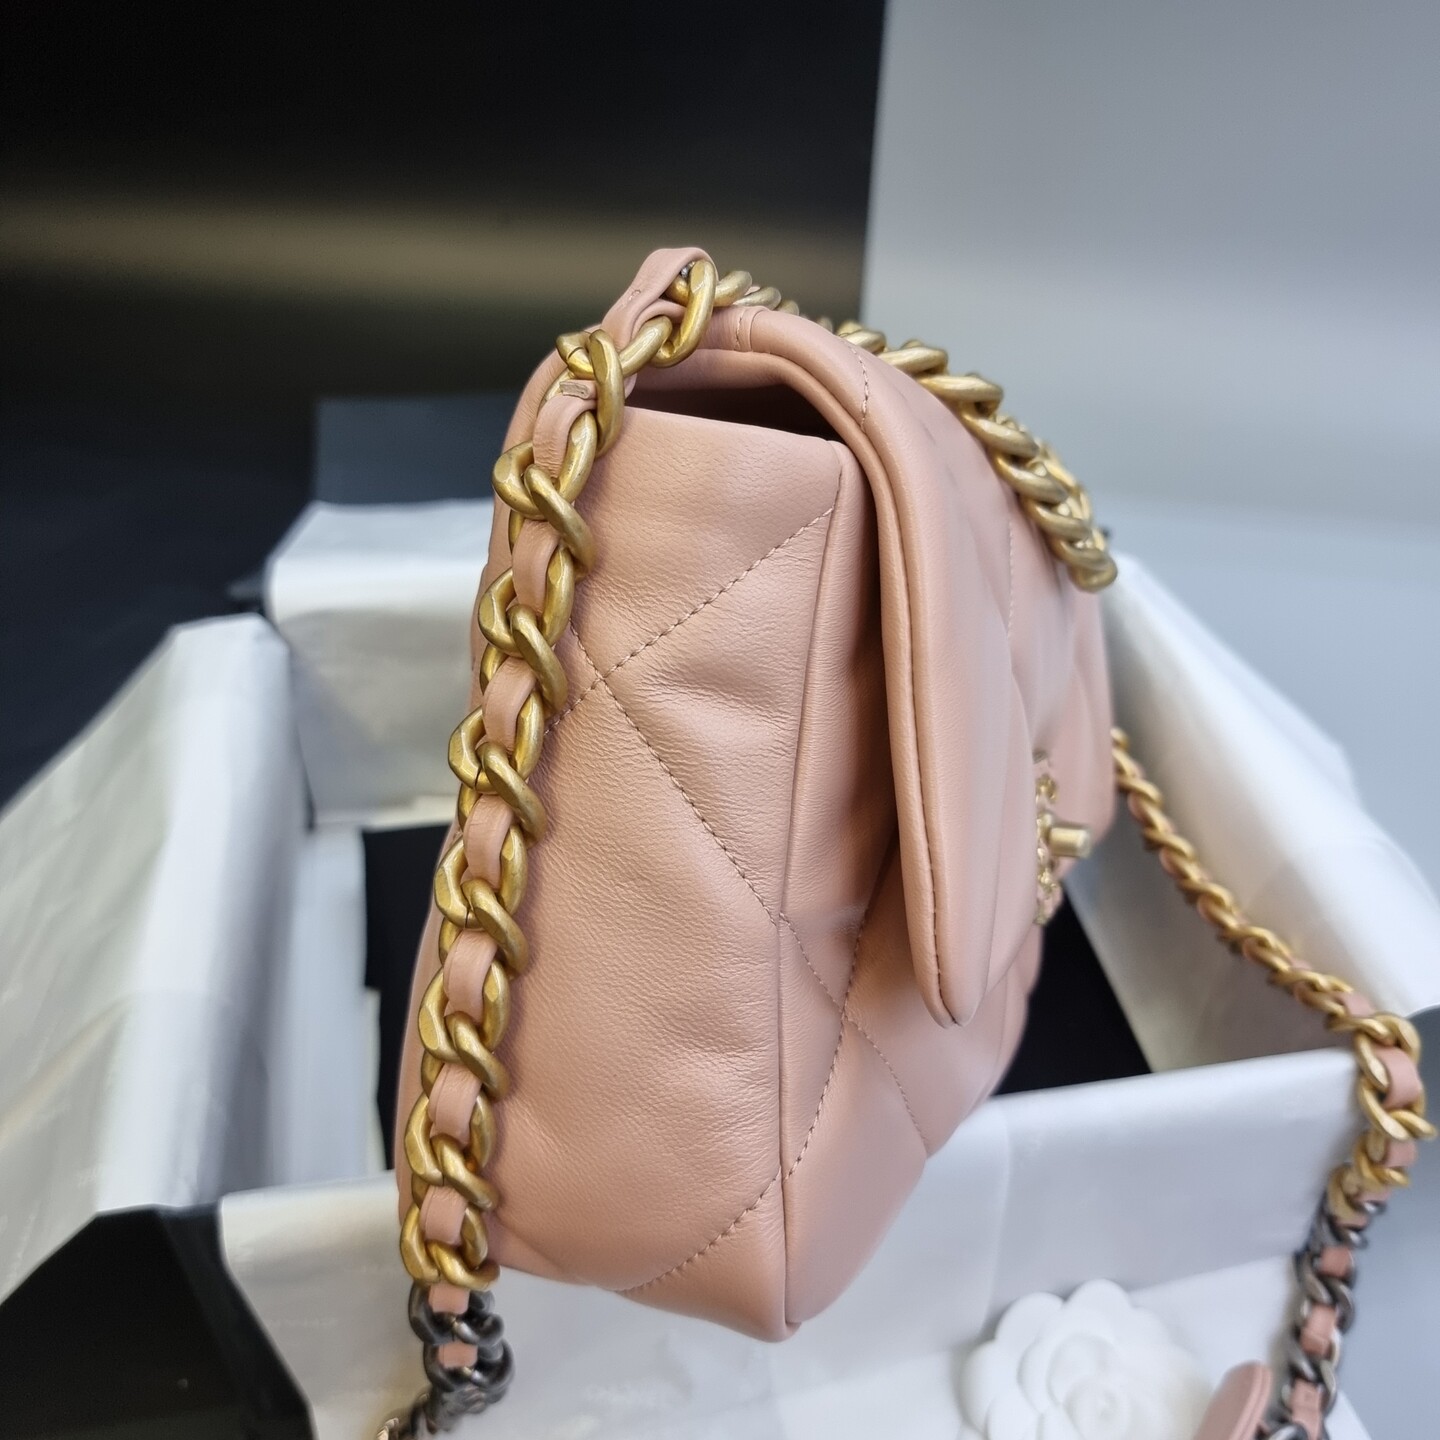 CHANEL 19 CC WOC Leather Wallet On Chain Crossbody Bag Pink